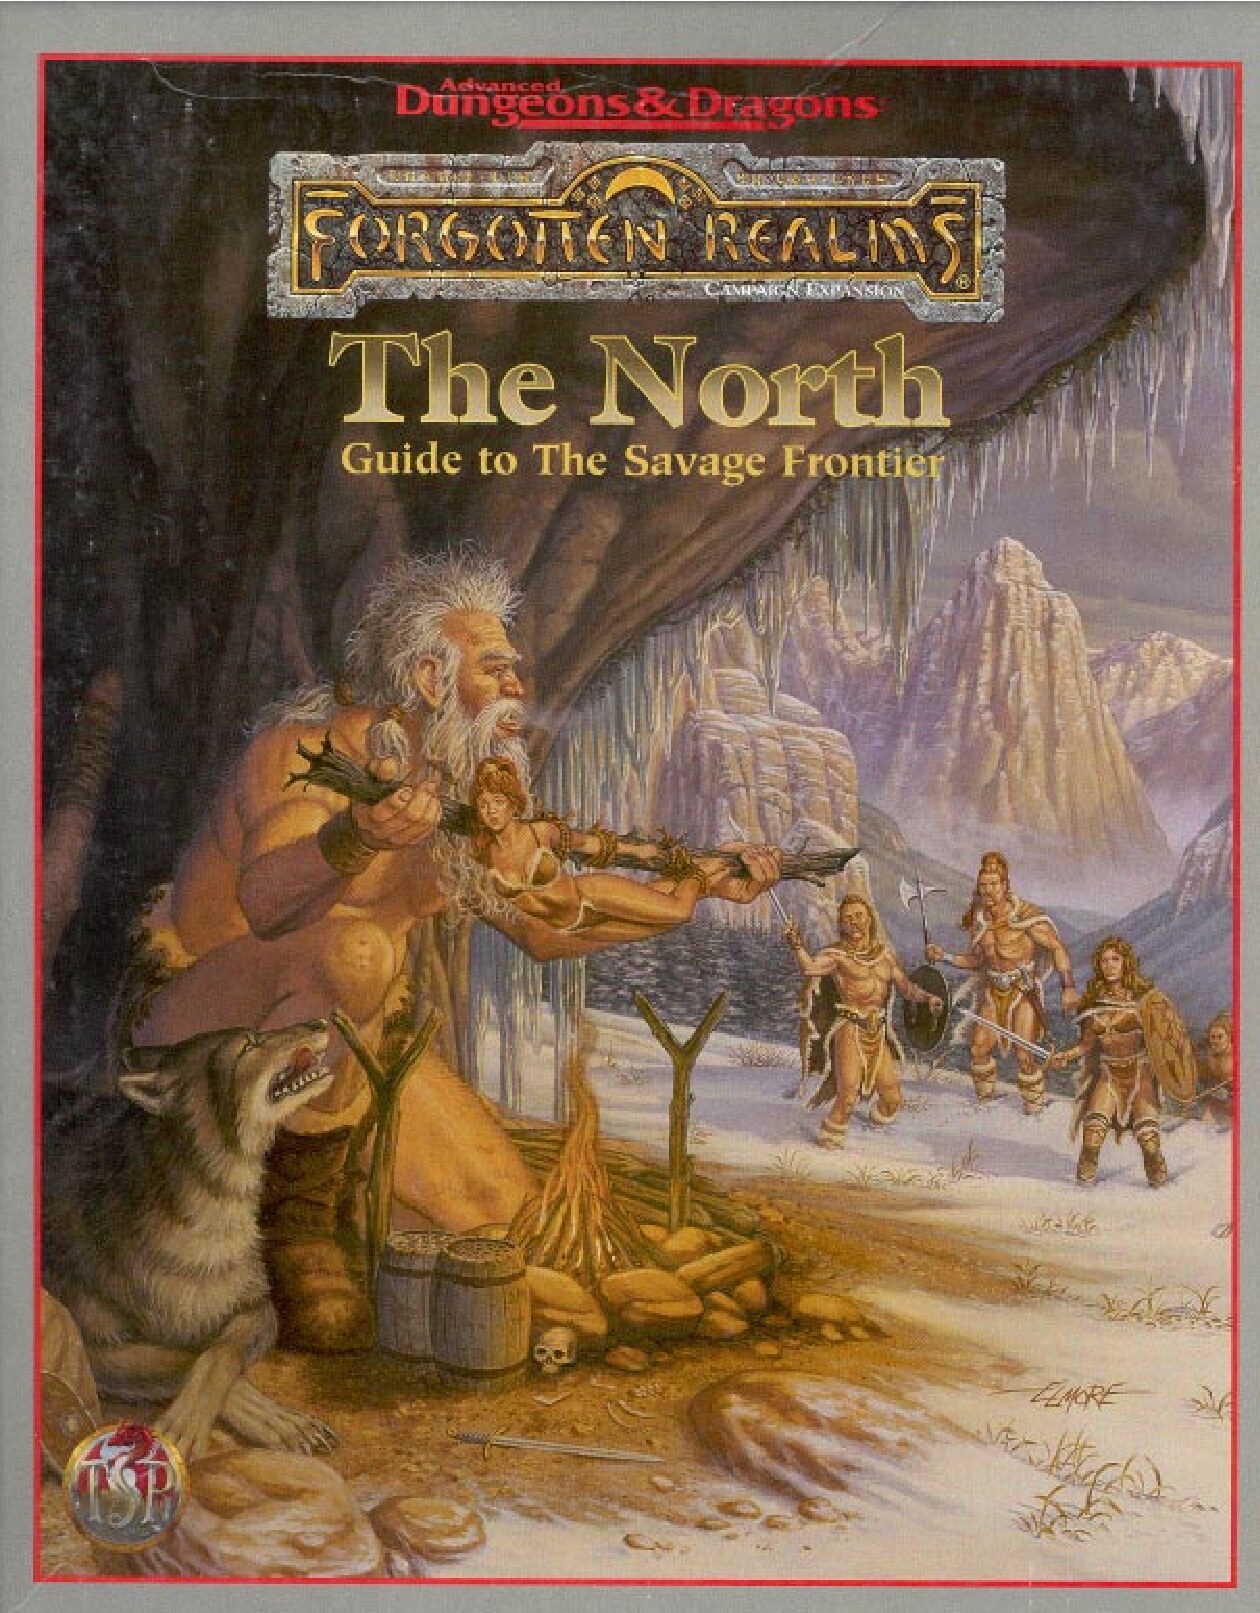 The North: Guide to the Savage Frontier